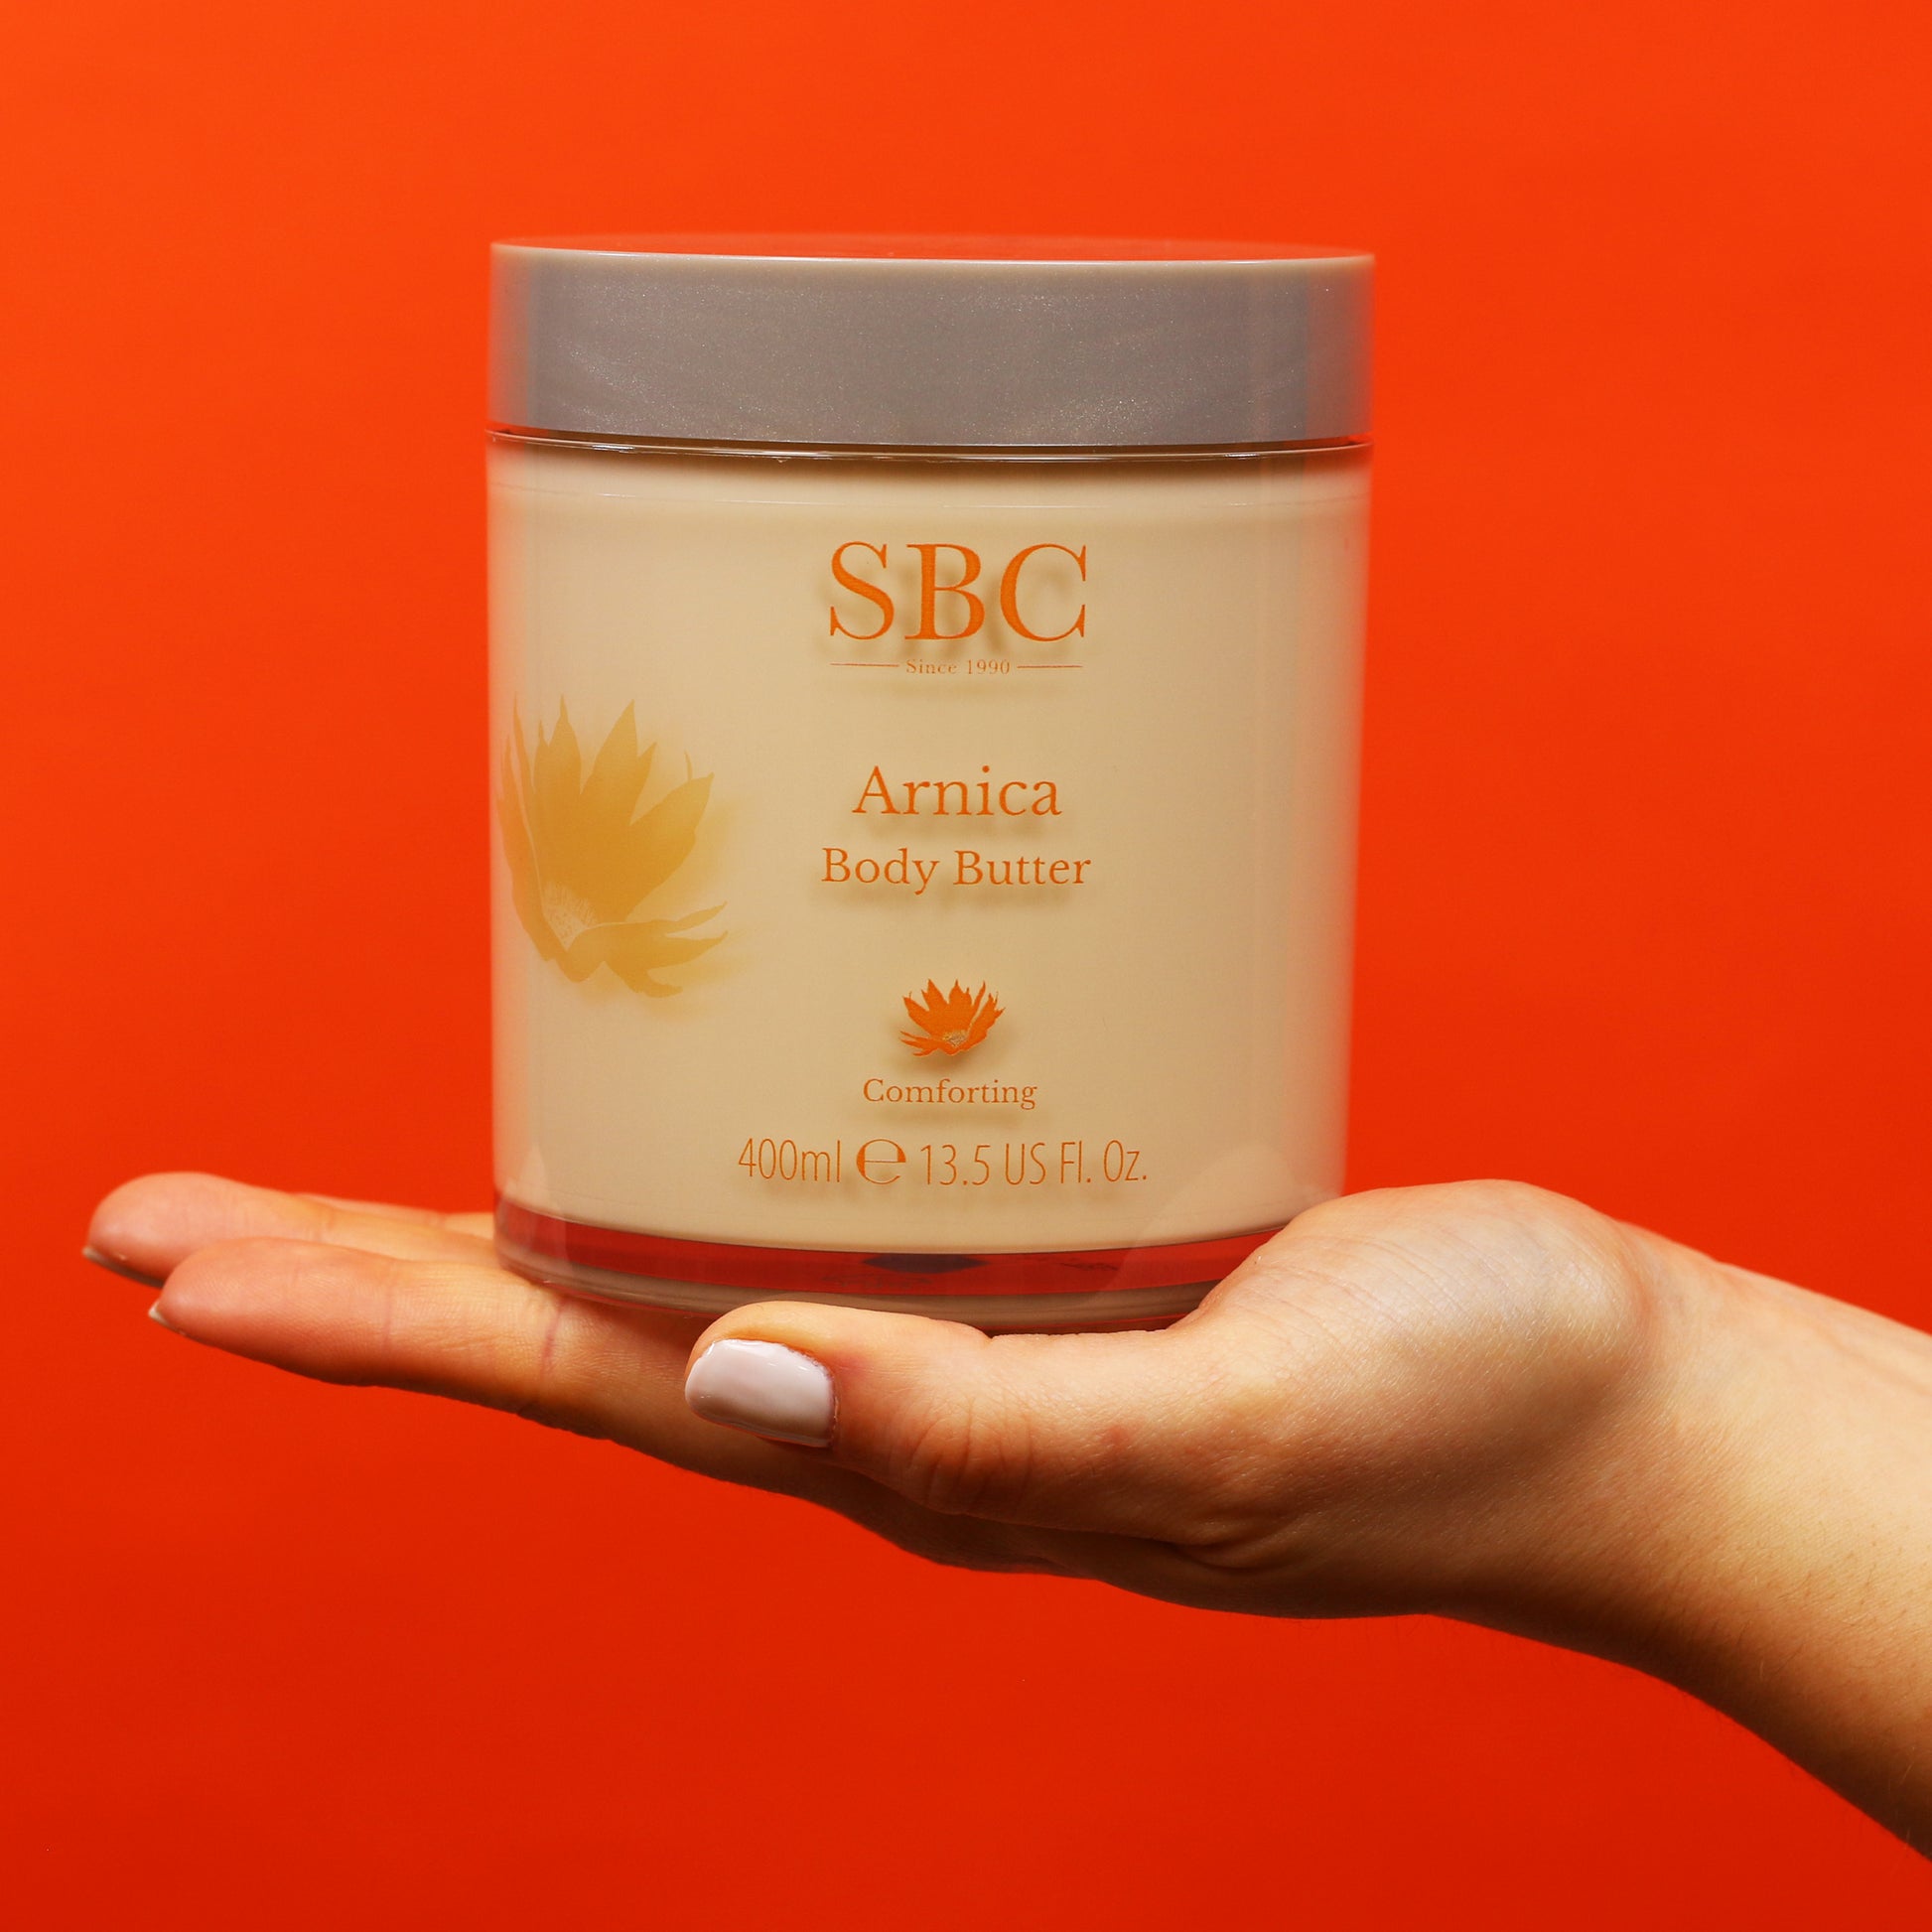 Arnica Body Butter being held on a flat palm on a bright red background 